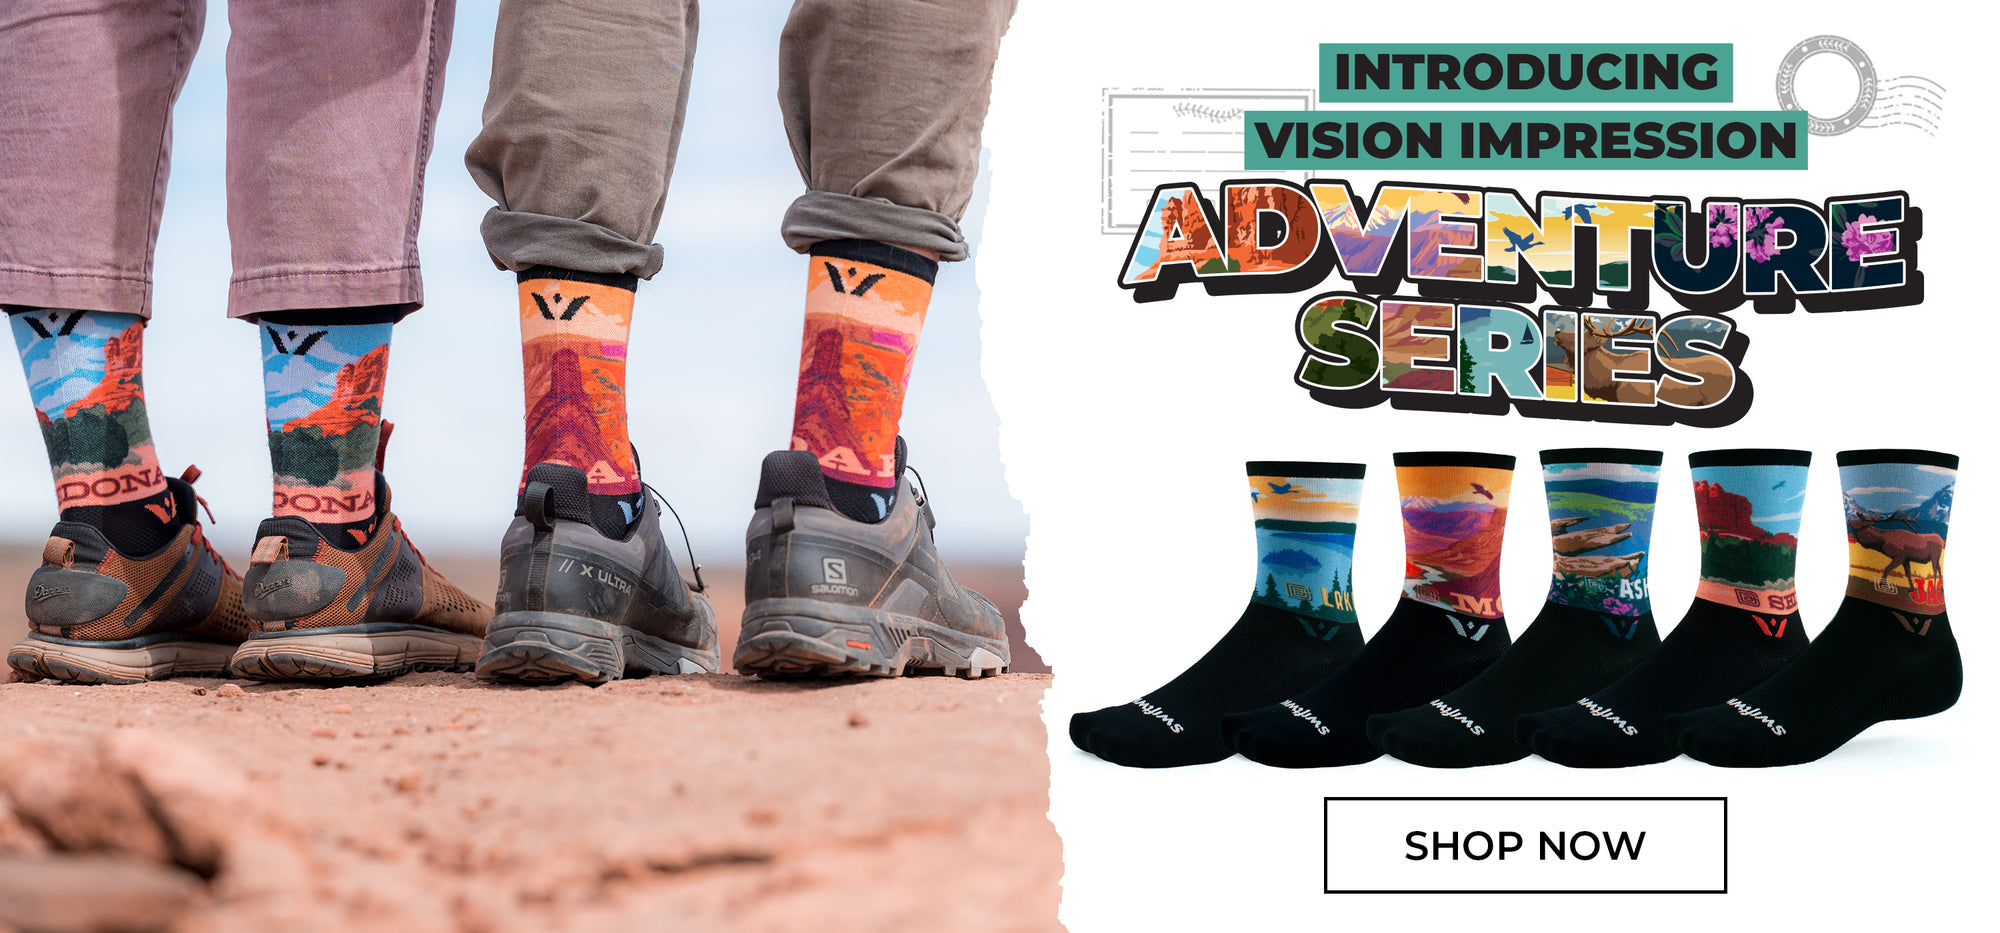 Introducing VISION IMPRESSION ADVENTURE SERIES, Shop Now